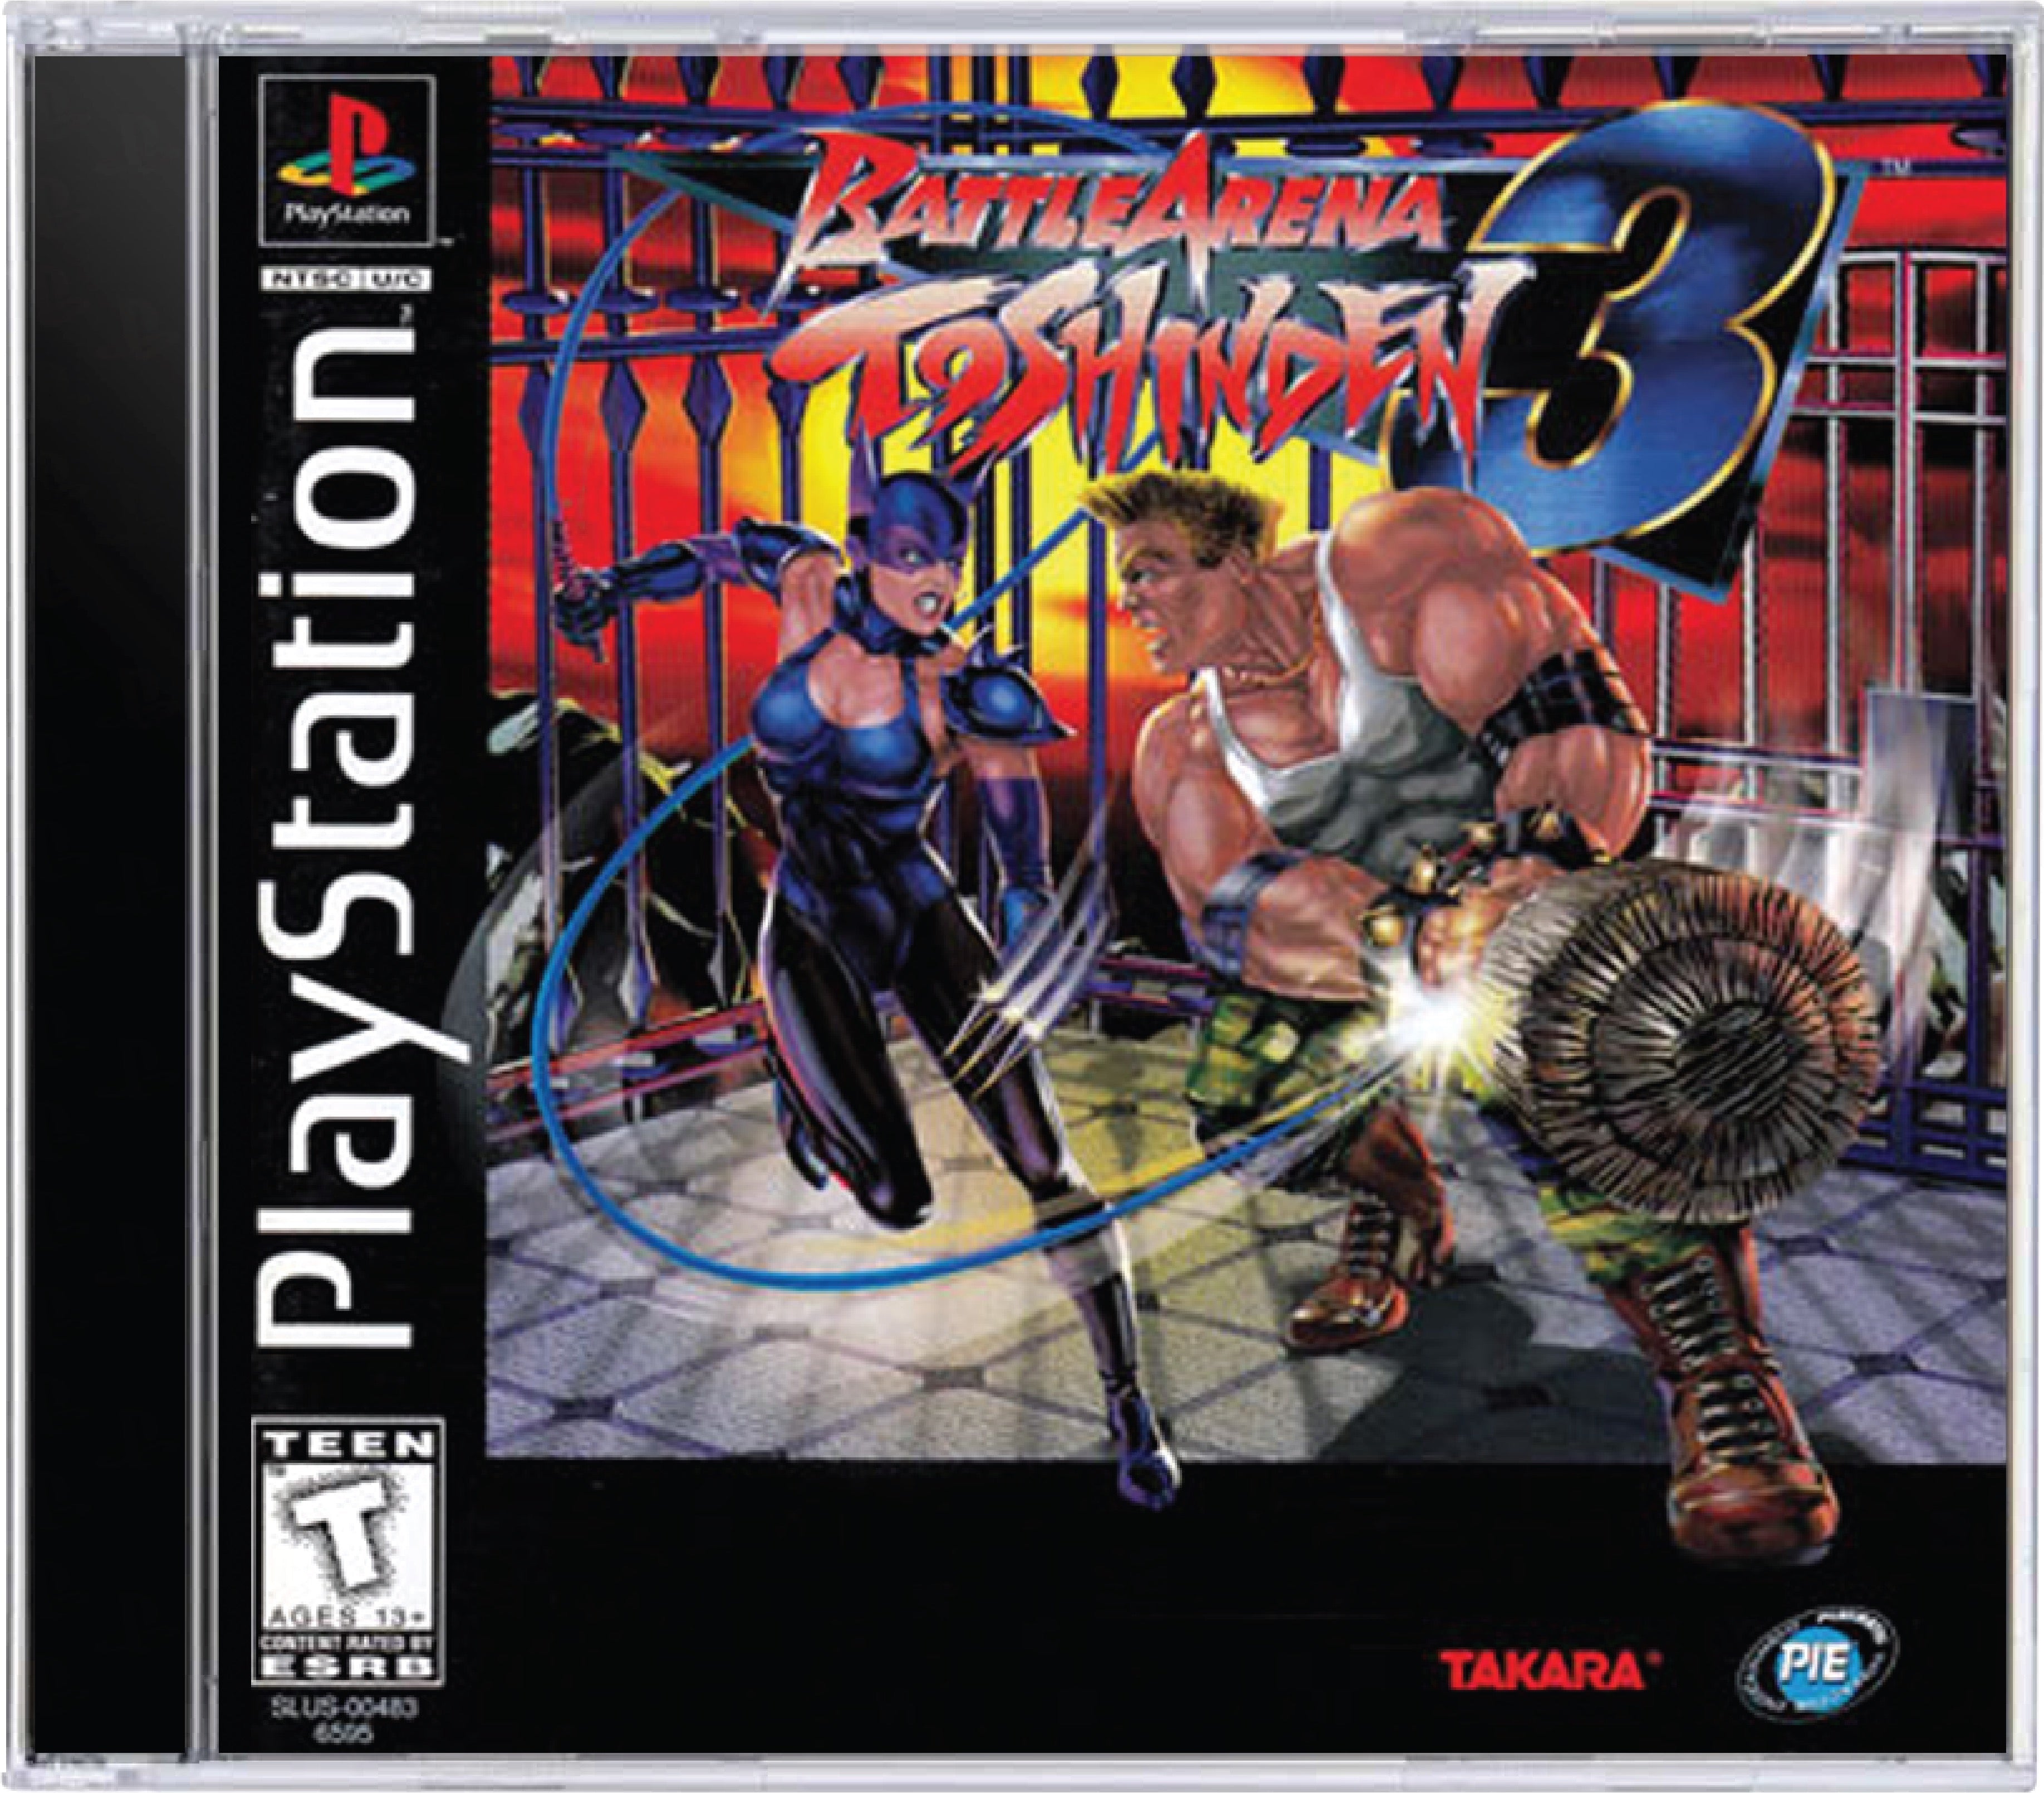 Battle Arena Toshinden 3 Cover Art and Product Photo